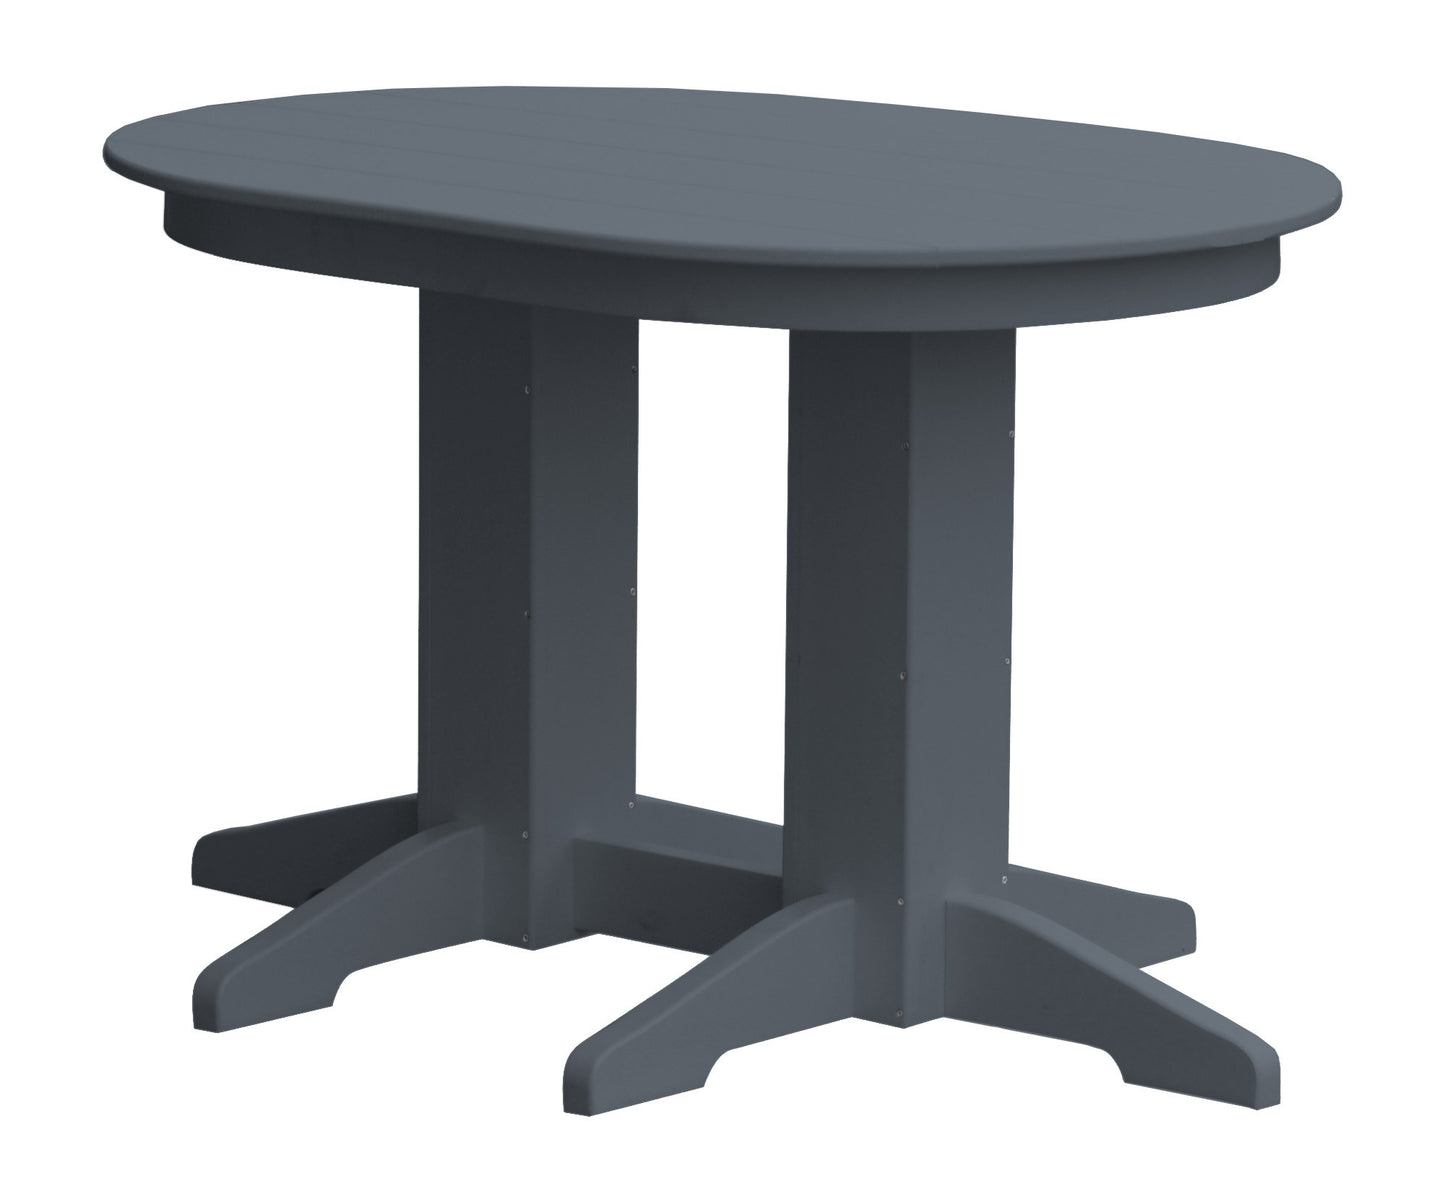 A&L Furniture Company Recycled Plastic 4'Oval Dining Table - LEAD TIME TO SHIP 10 BUSINESS DAYS